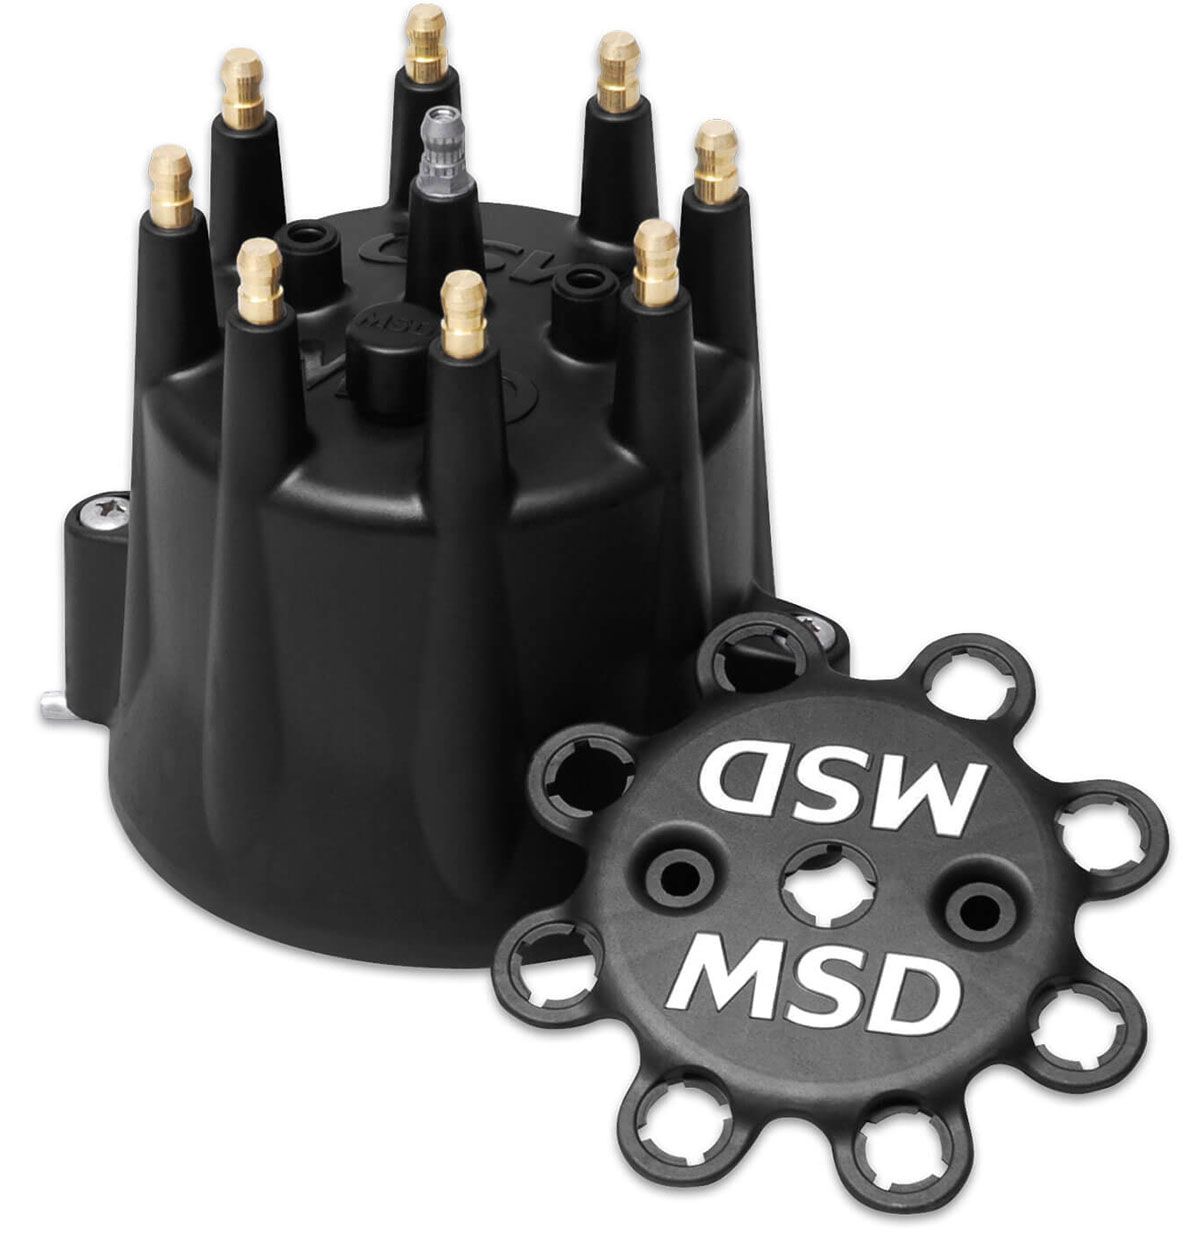 MSD84333 -  Distributor Cap Replacement Cap to suit most MSD Billet Distributors with GM style cap, Black